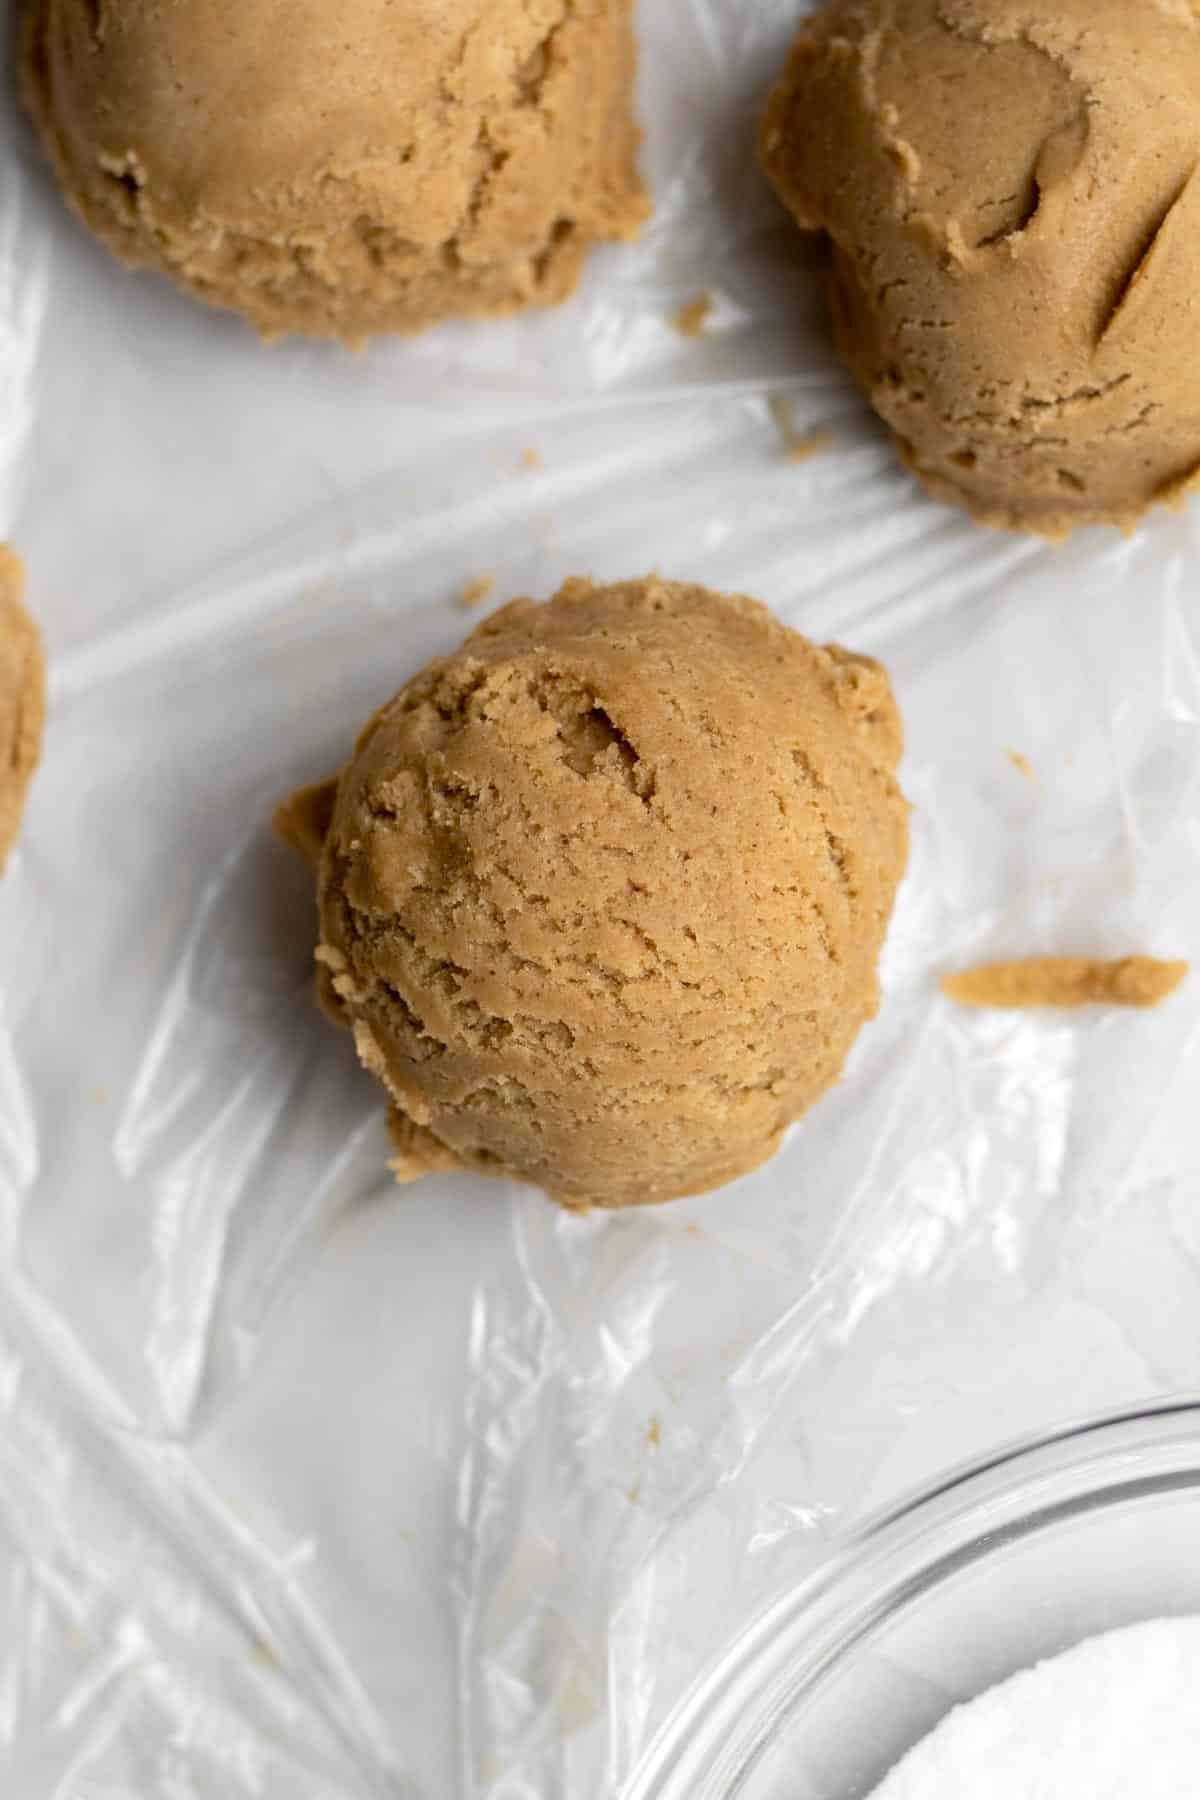 Scooping balls of ginger cookie dough.